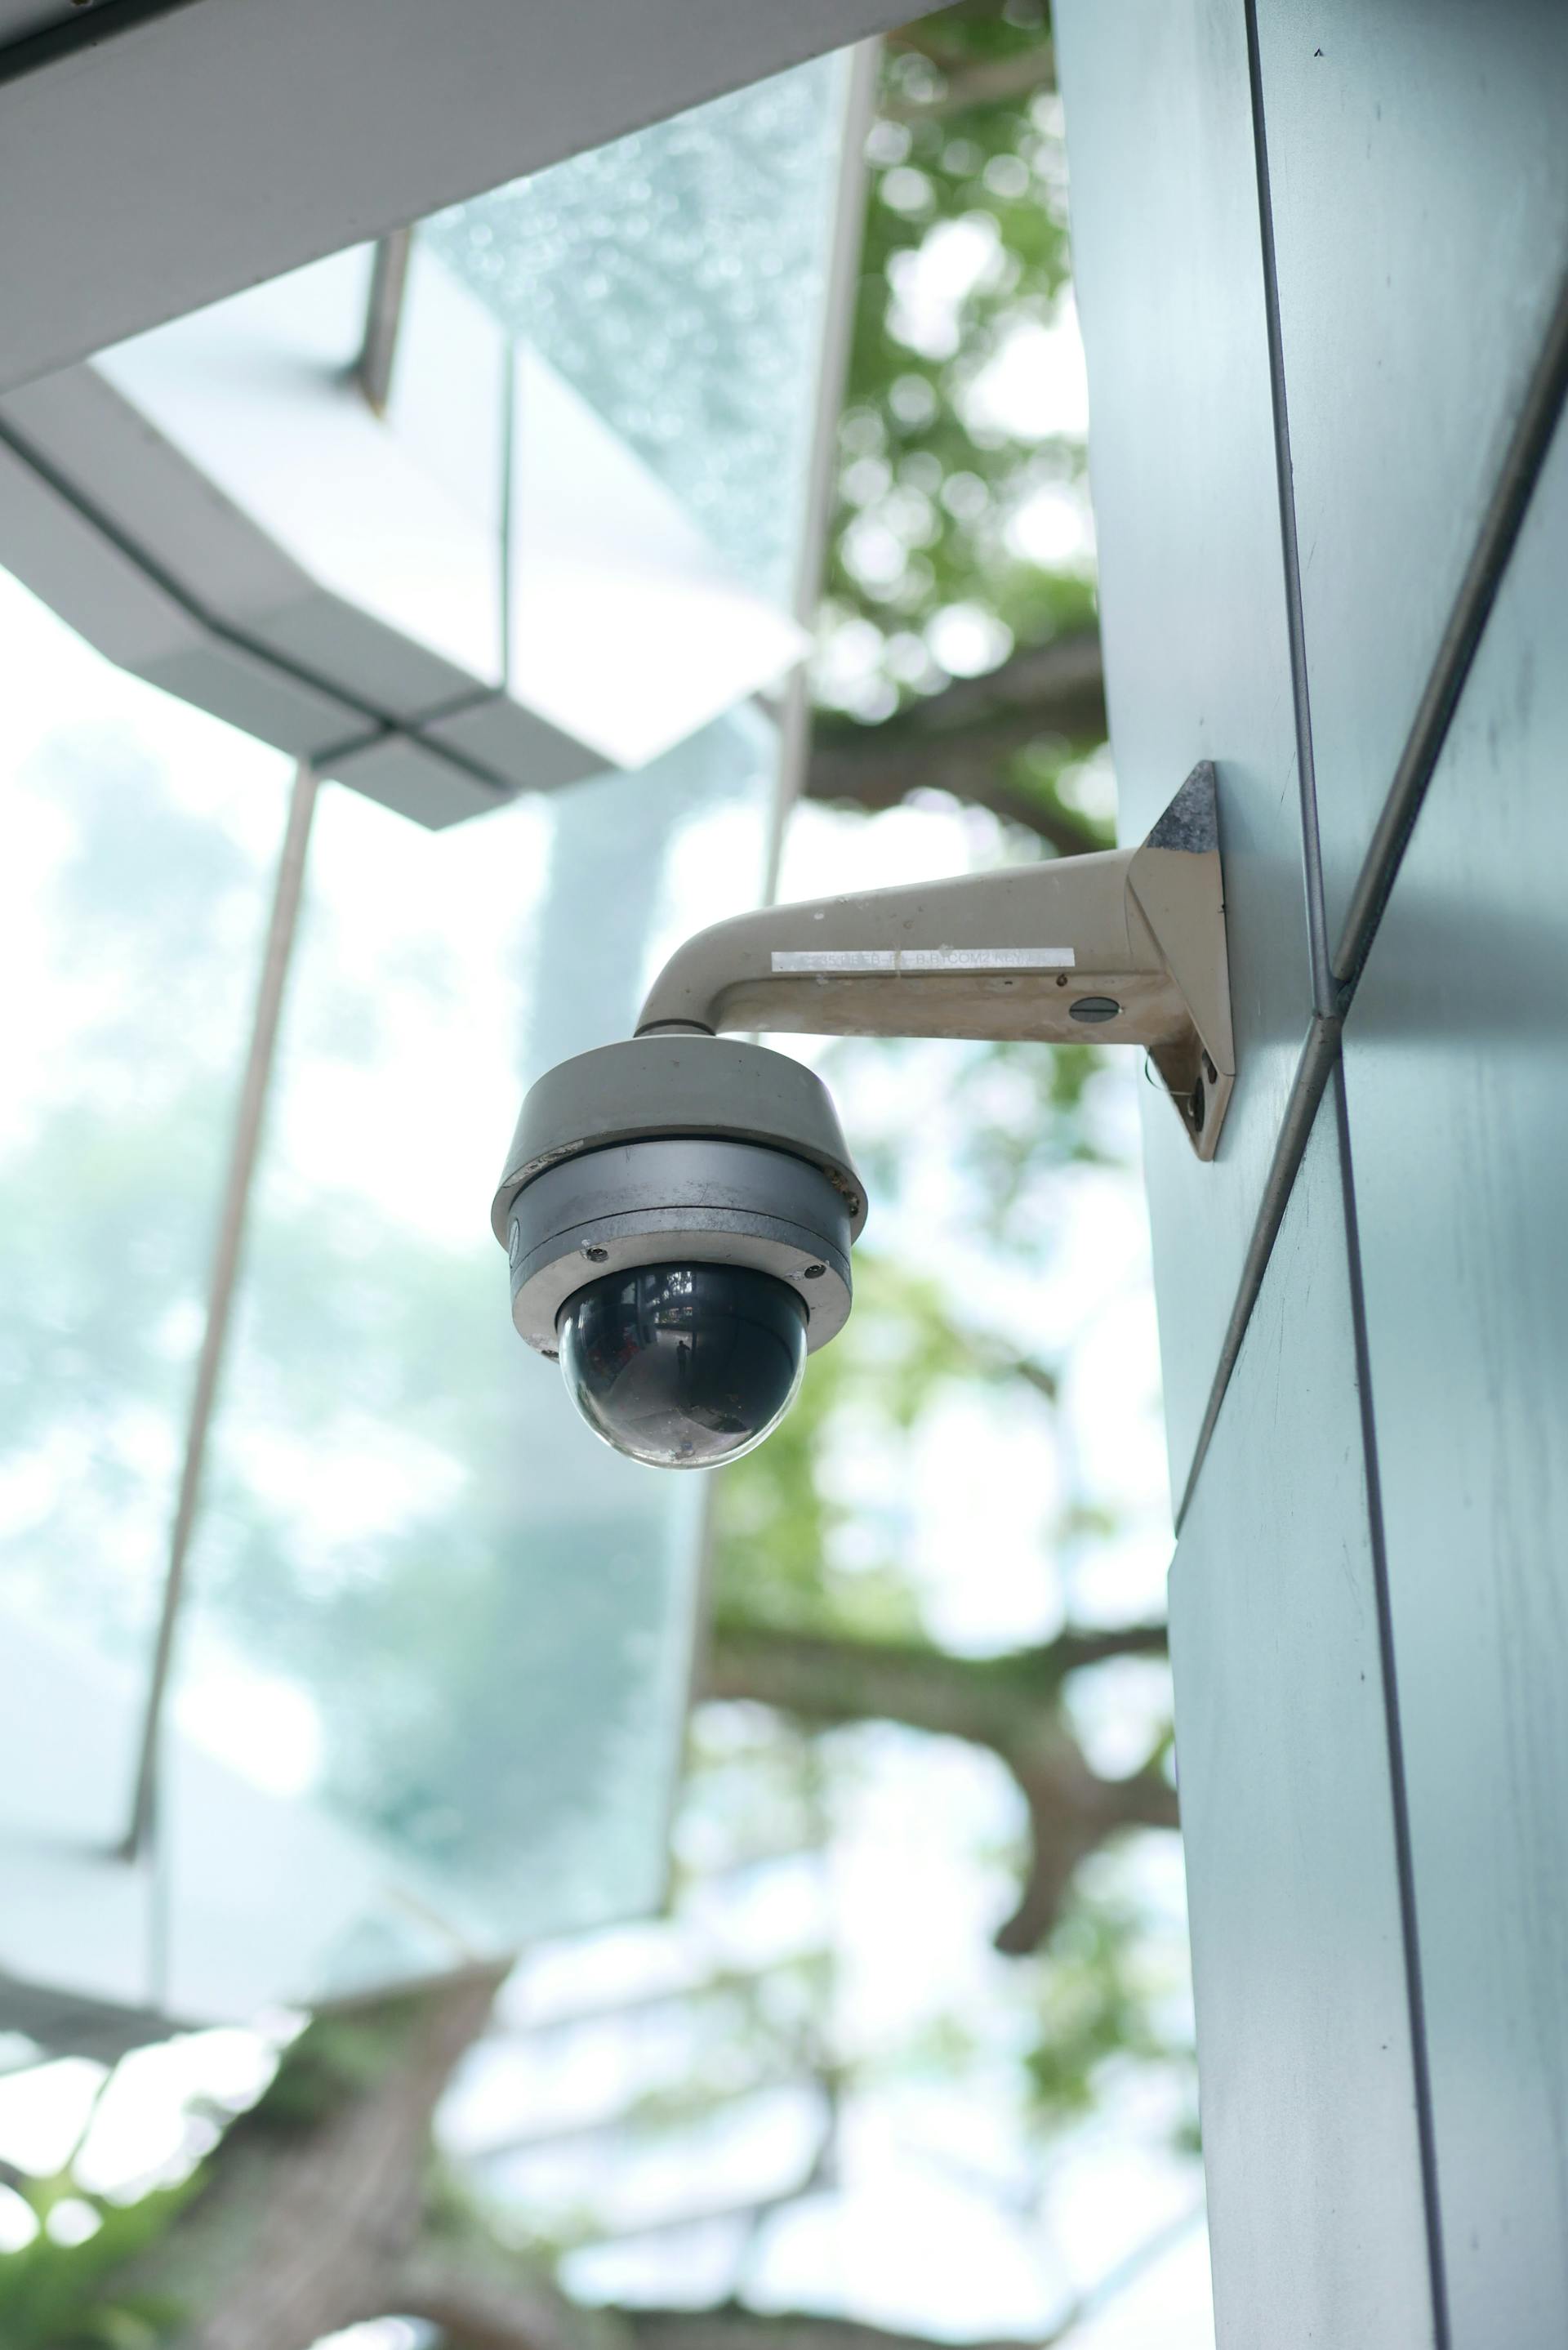 A CCTV camera mounted on the wall | Source: Pexels